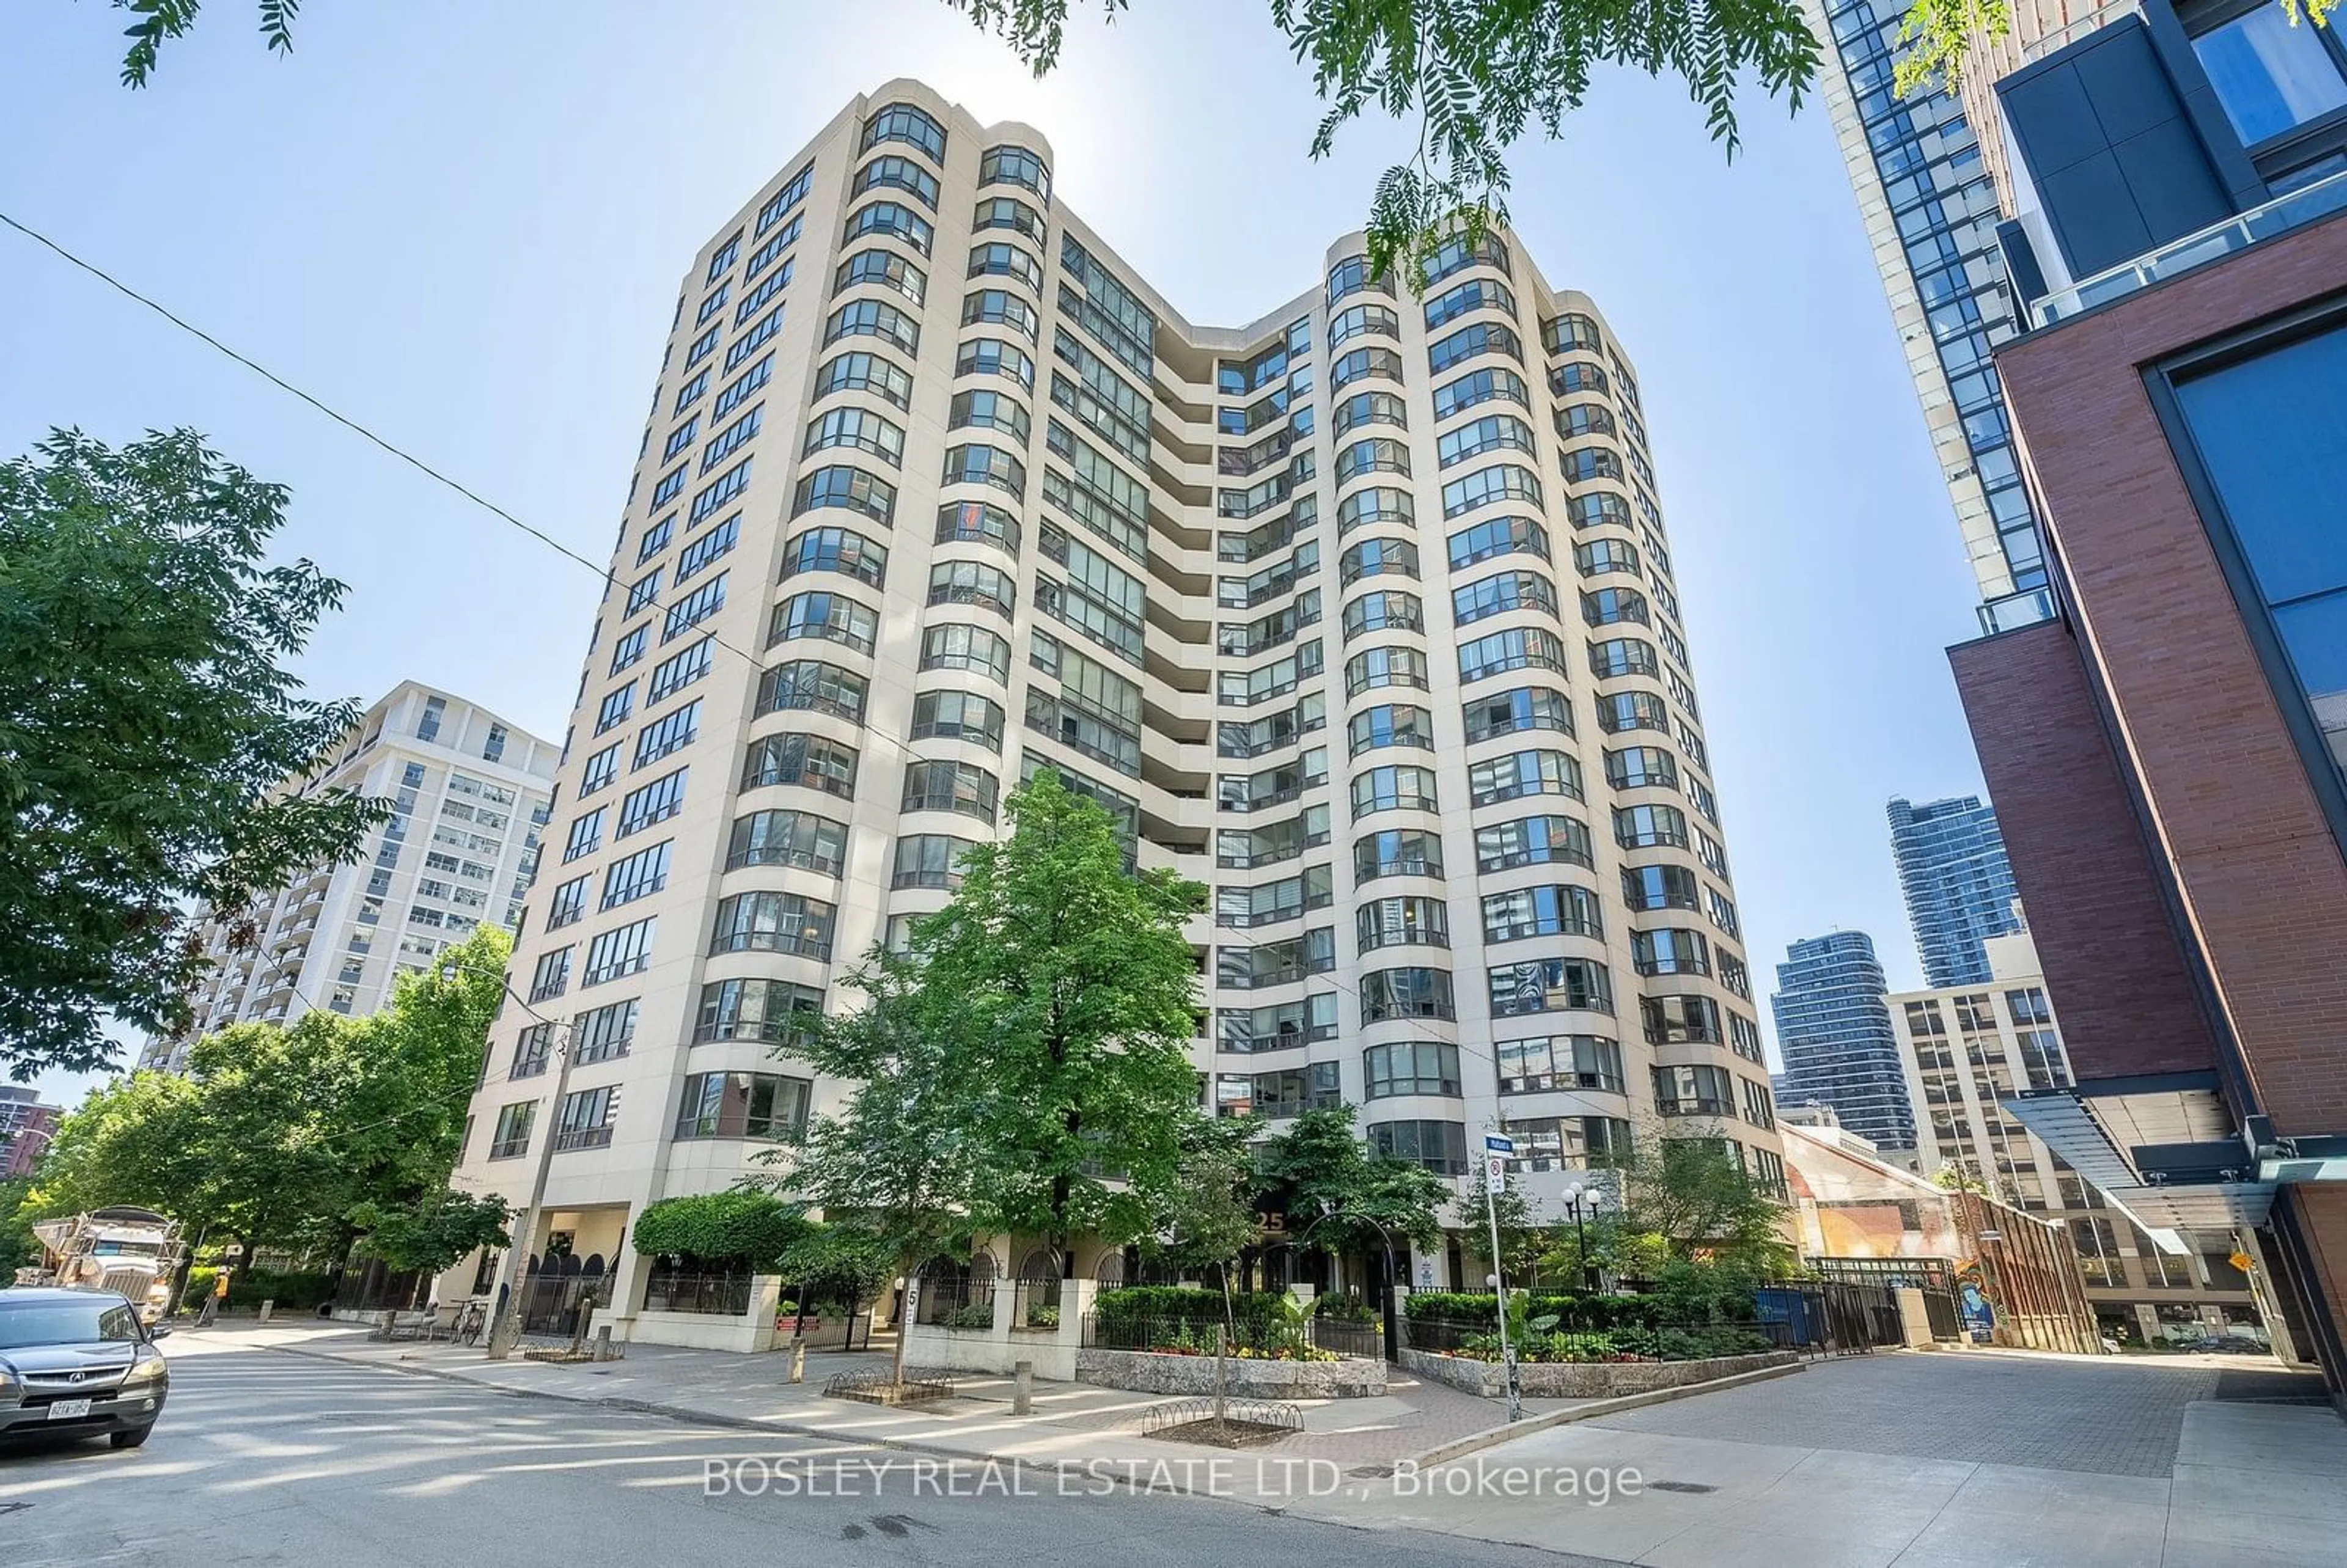 A pic from exterior of the house or condo for 25 Maitland St #1703, Toronto Ontario M4Y 2W1